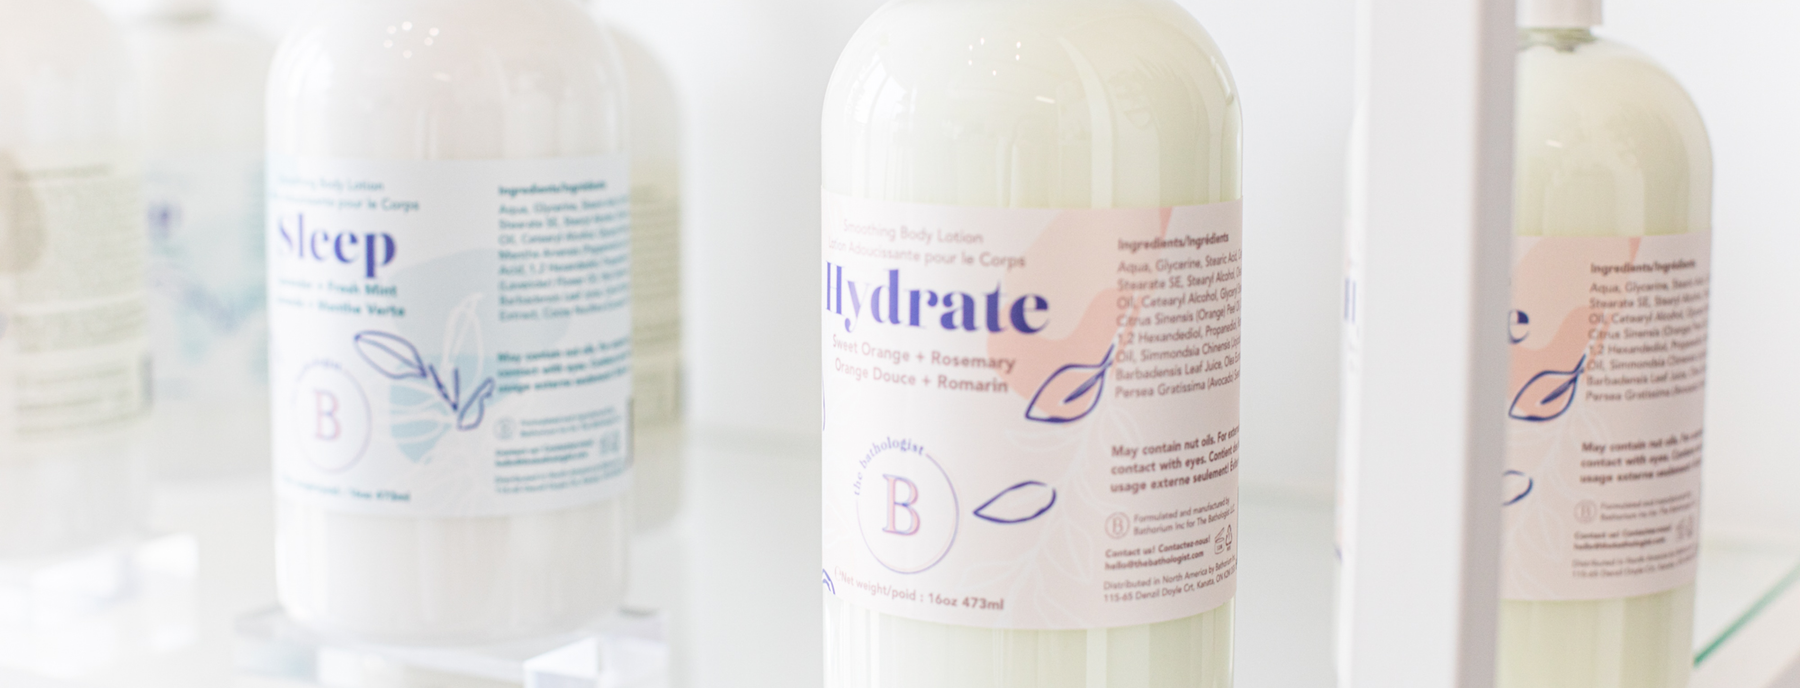 Hydrate and Sleep Body Lotions